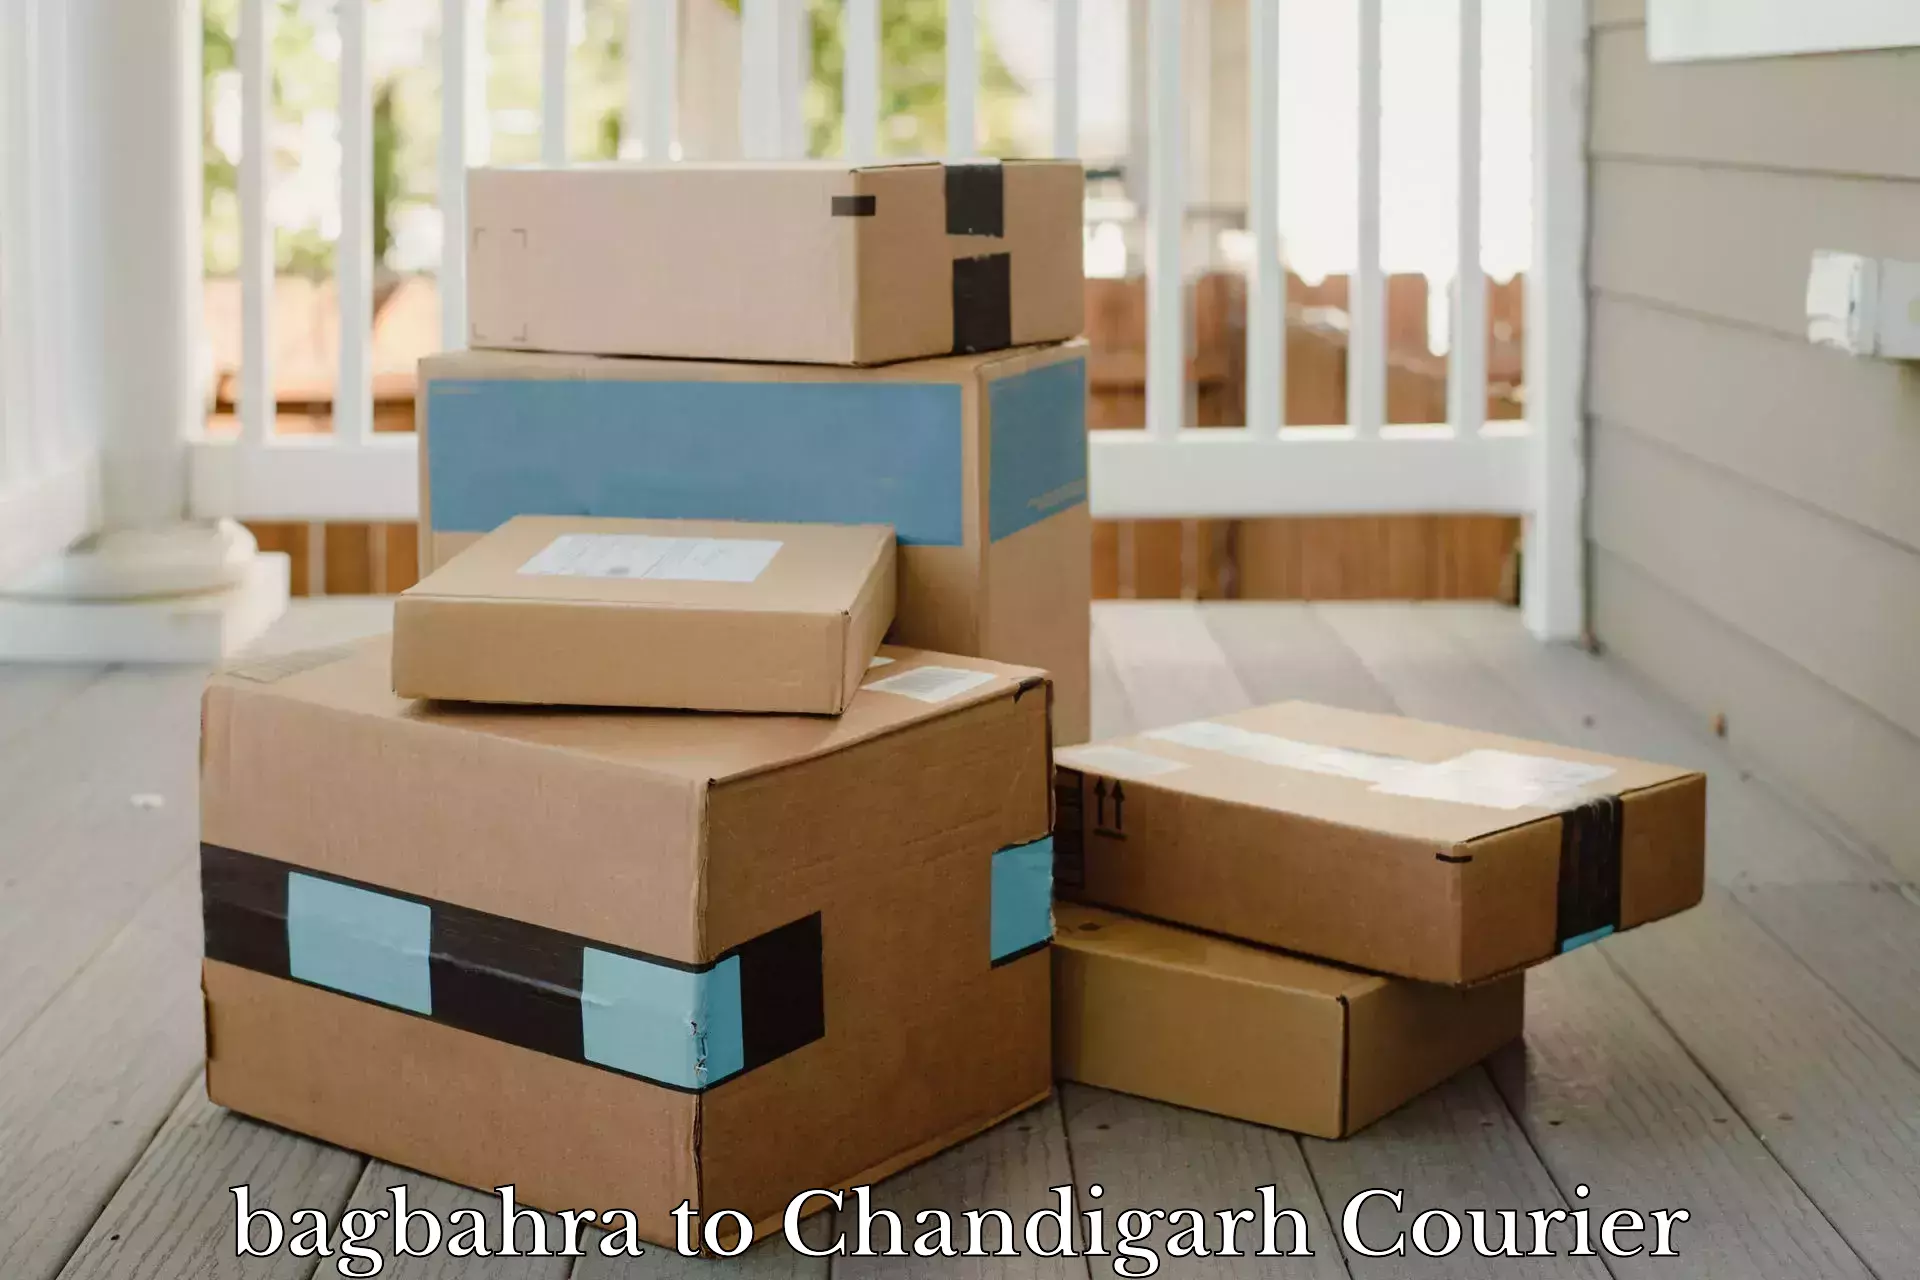 Round-the-clock parcel delivery bagbahra to Chandigarh